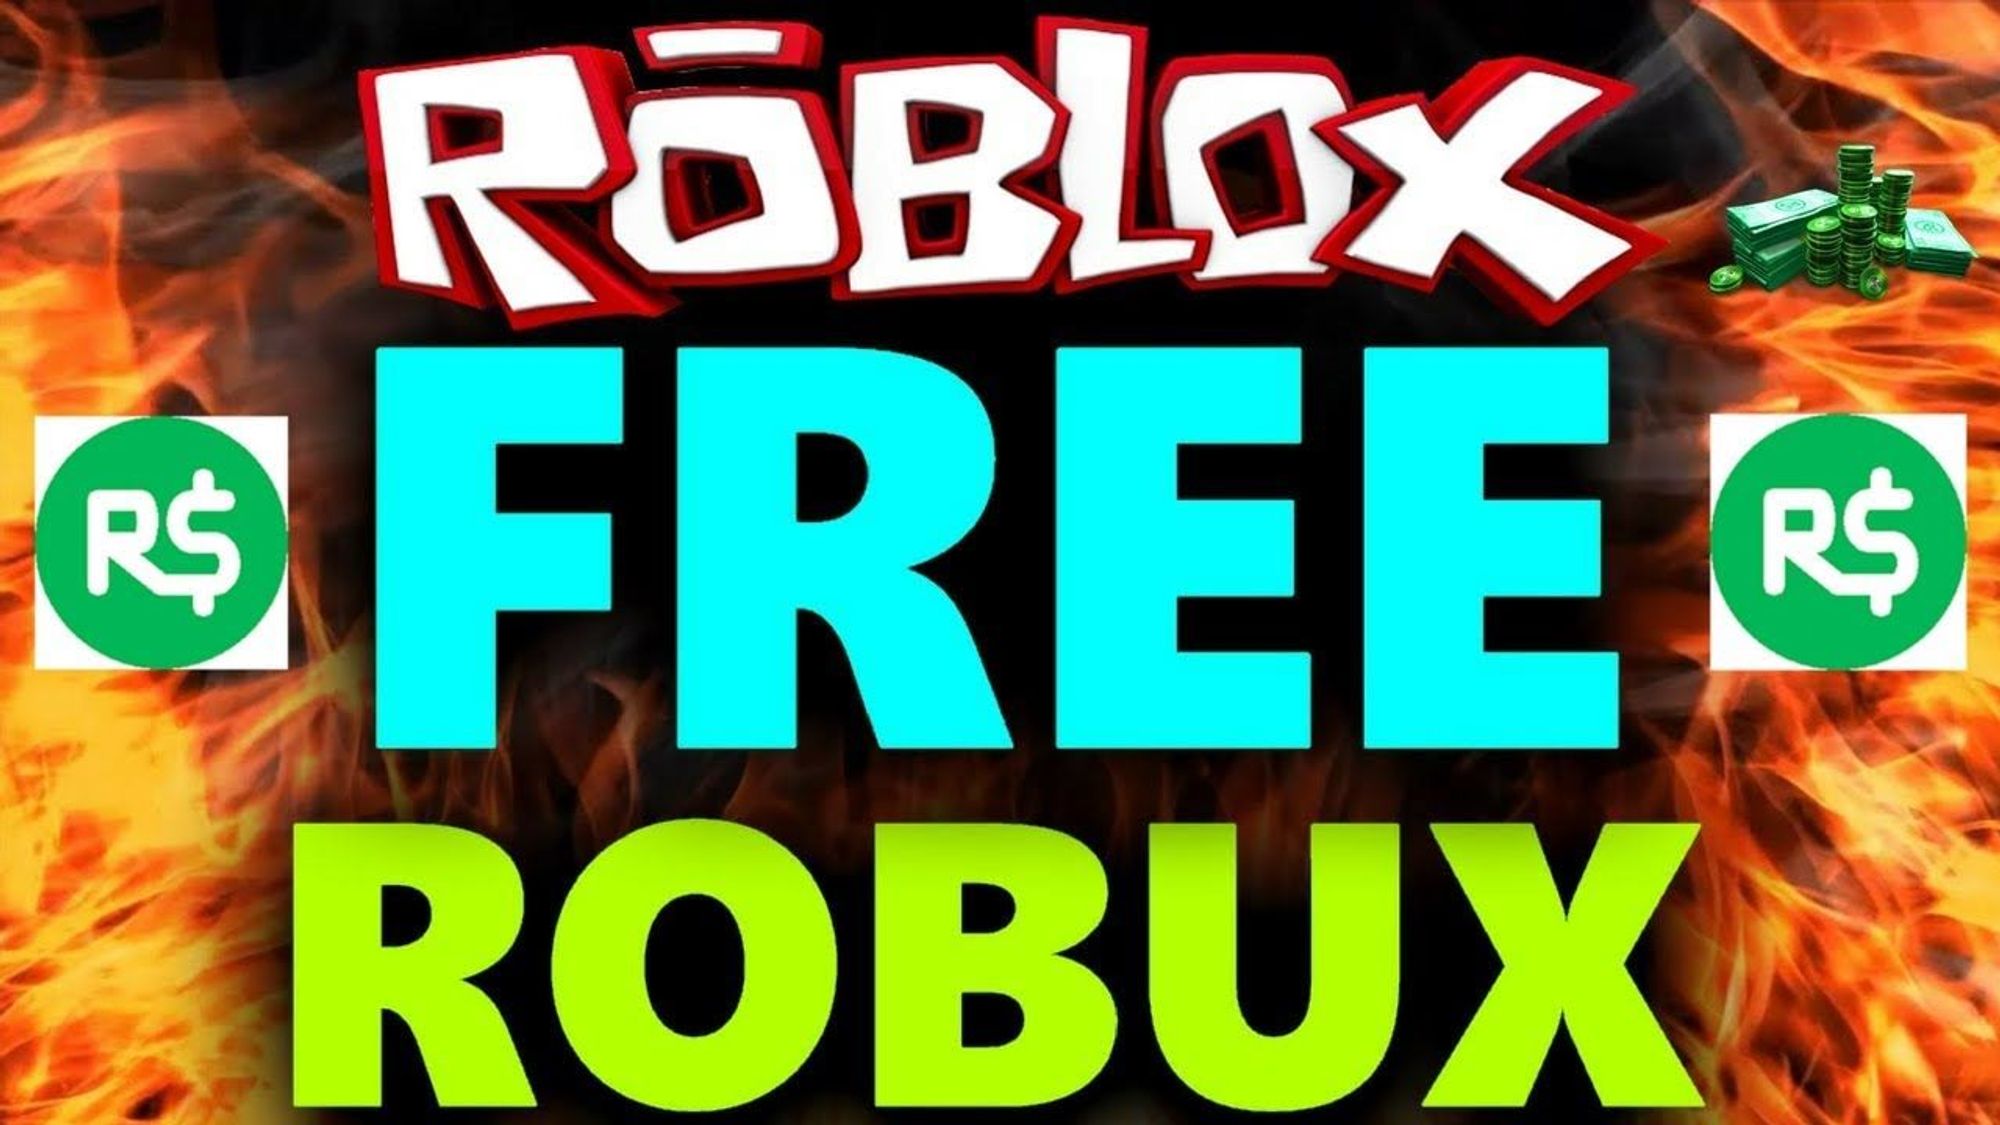 How To Get Roblox Free Robux - roblox glitch get free stuff 1k views on the cheap